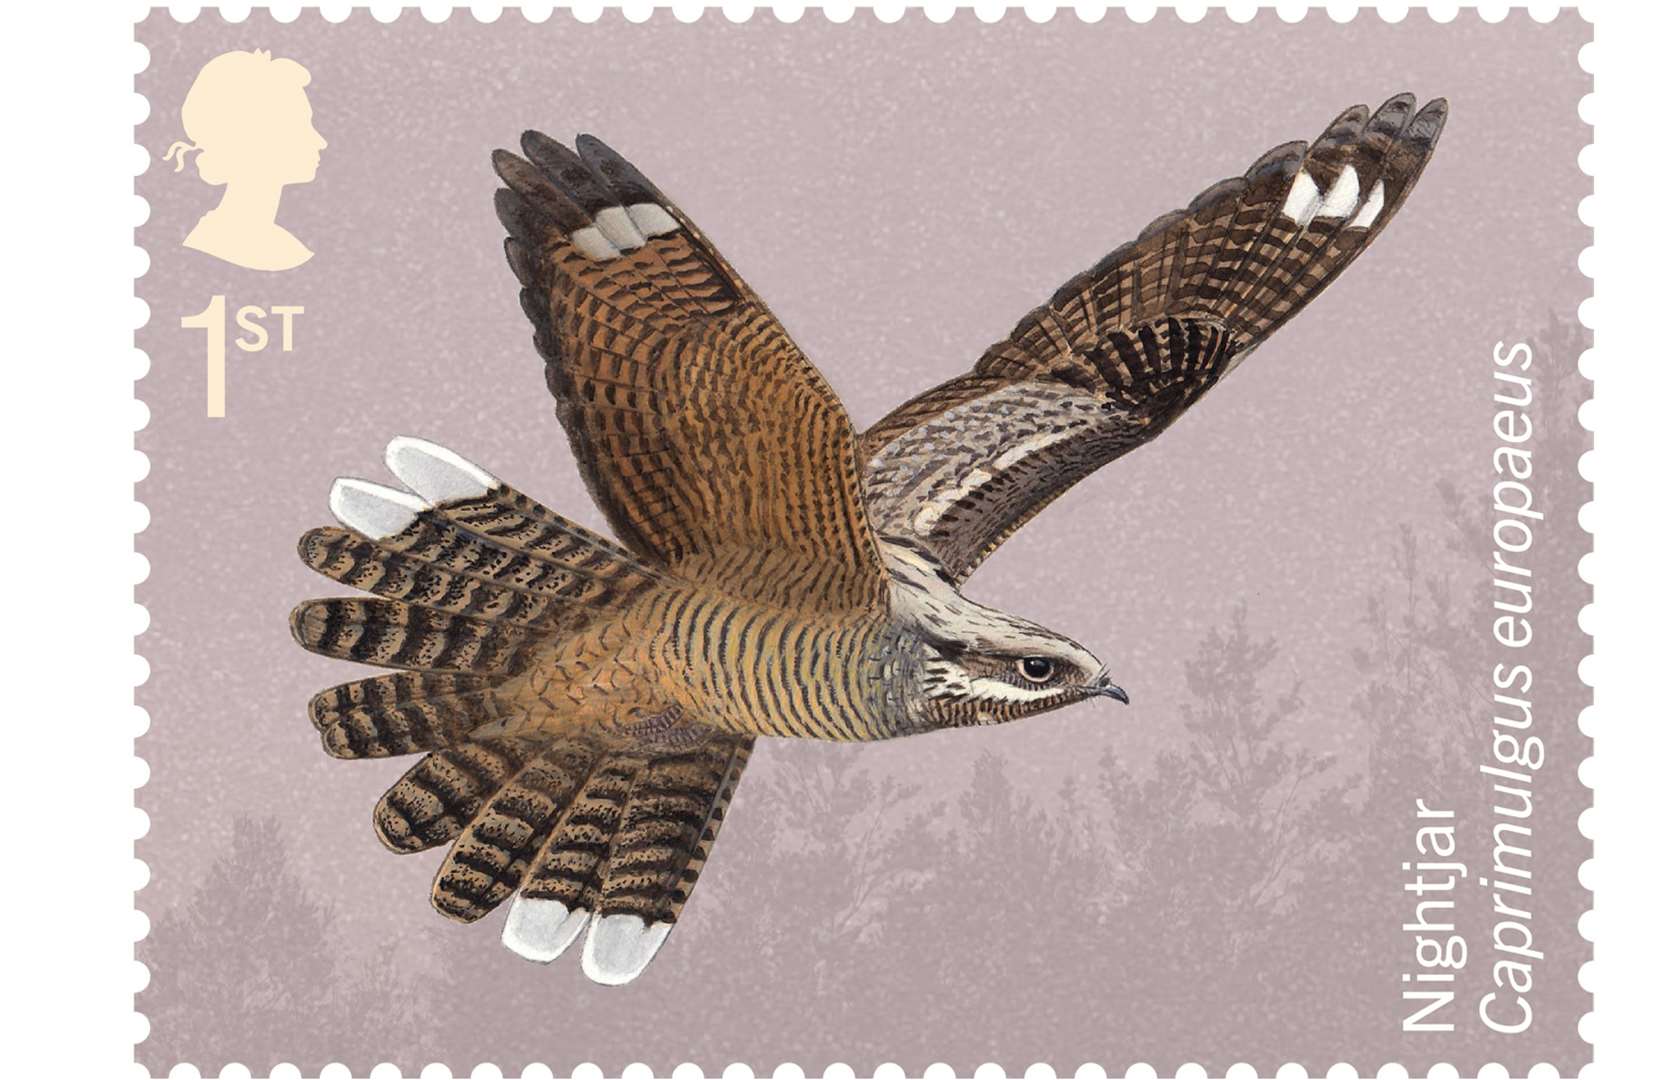 The stamps have been drawn by ornithologist Killian Mullarney